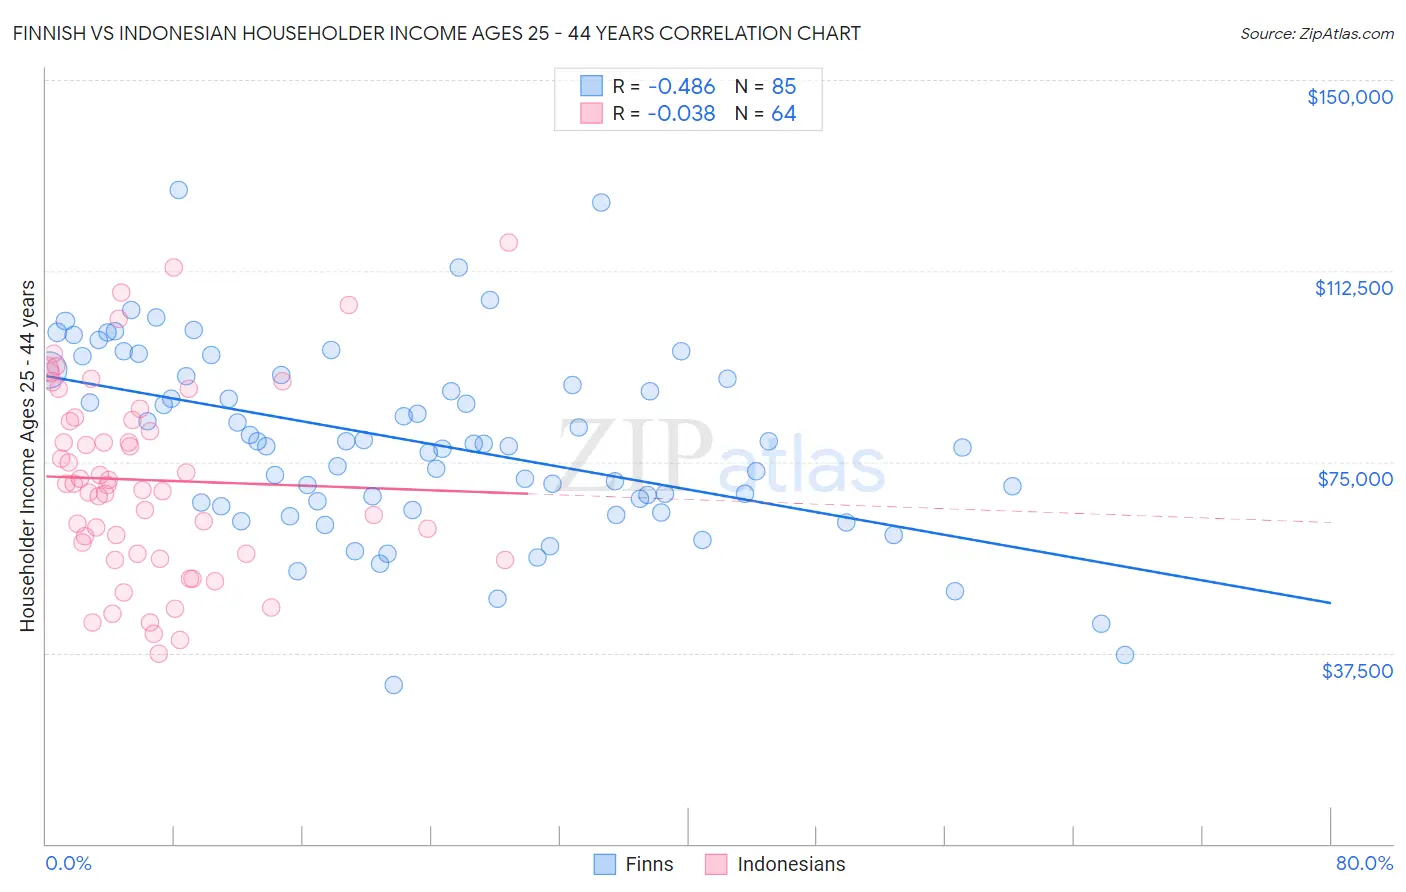 Finnish vs Indonesian Householder Income Ages 25 - 44 years